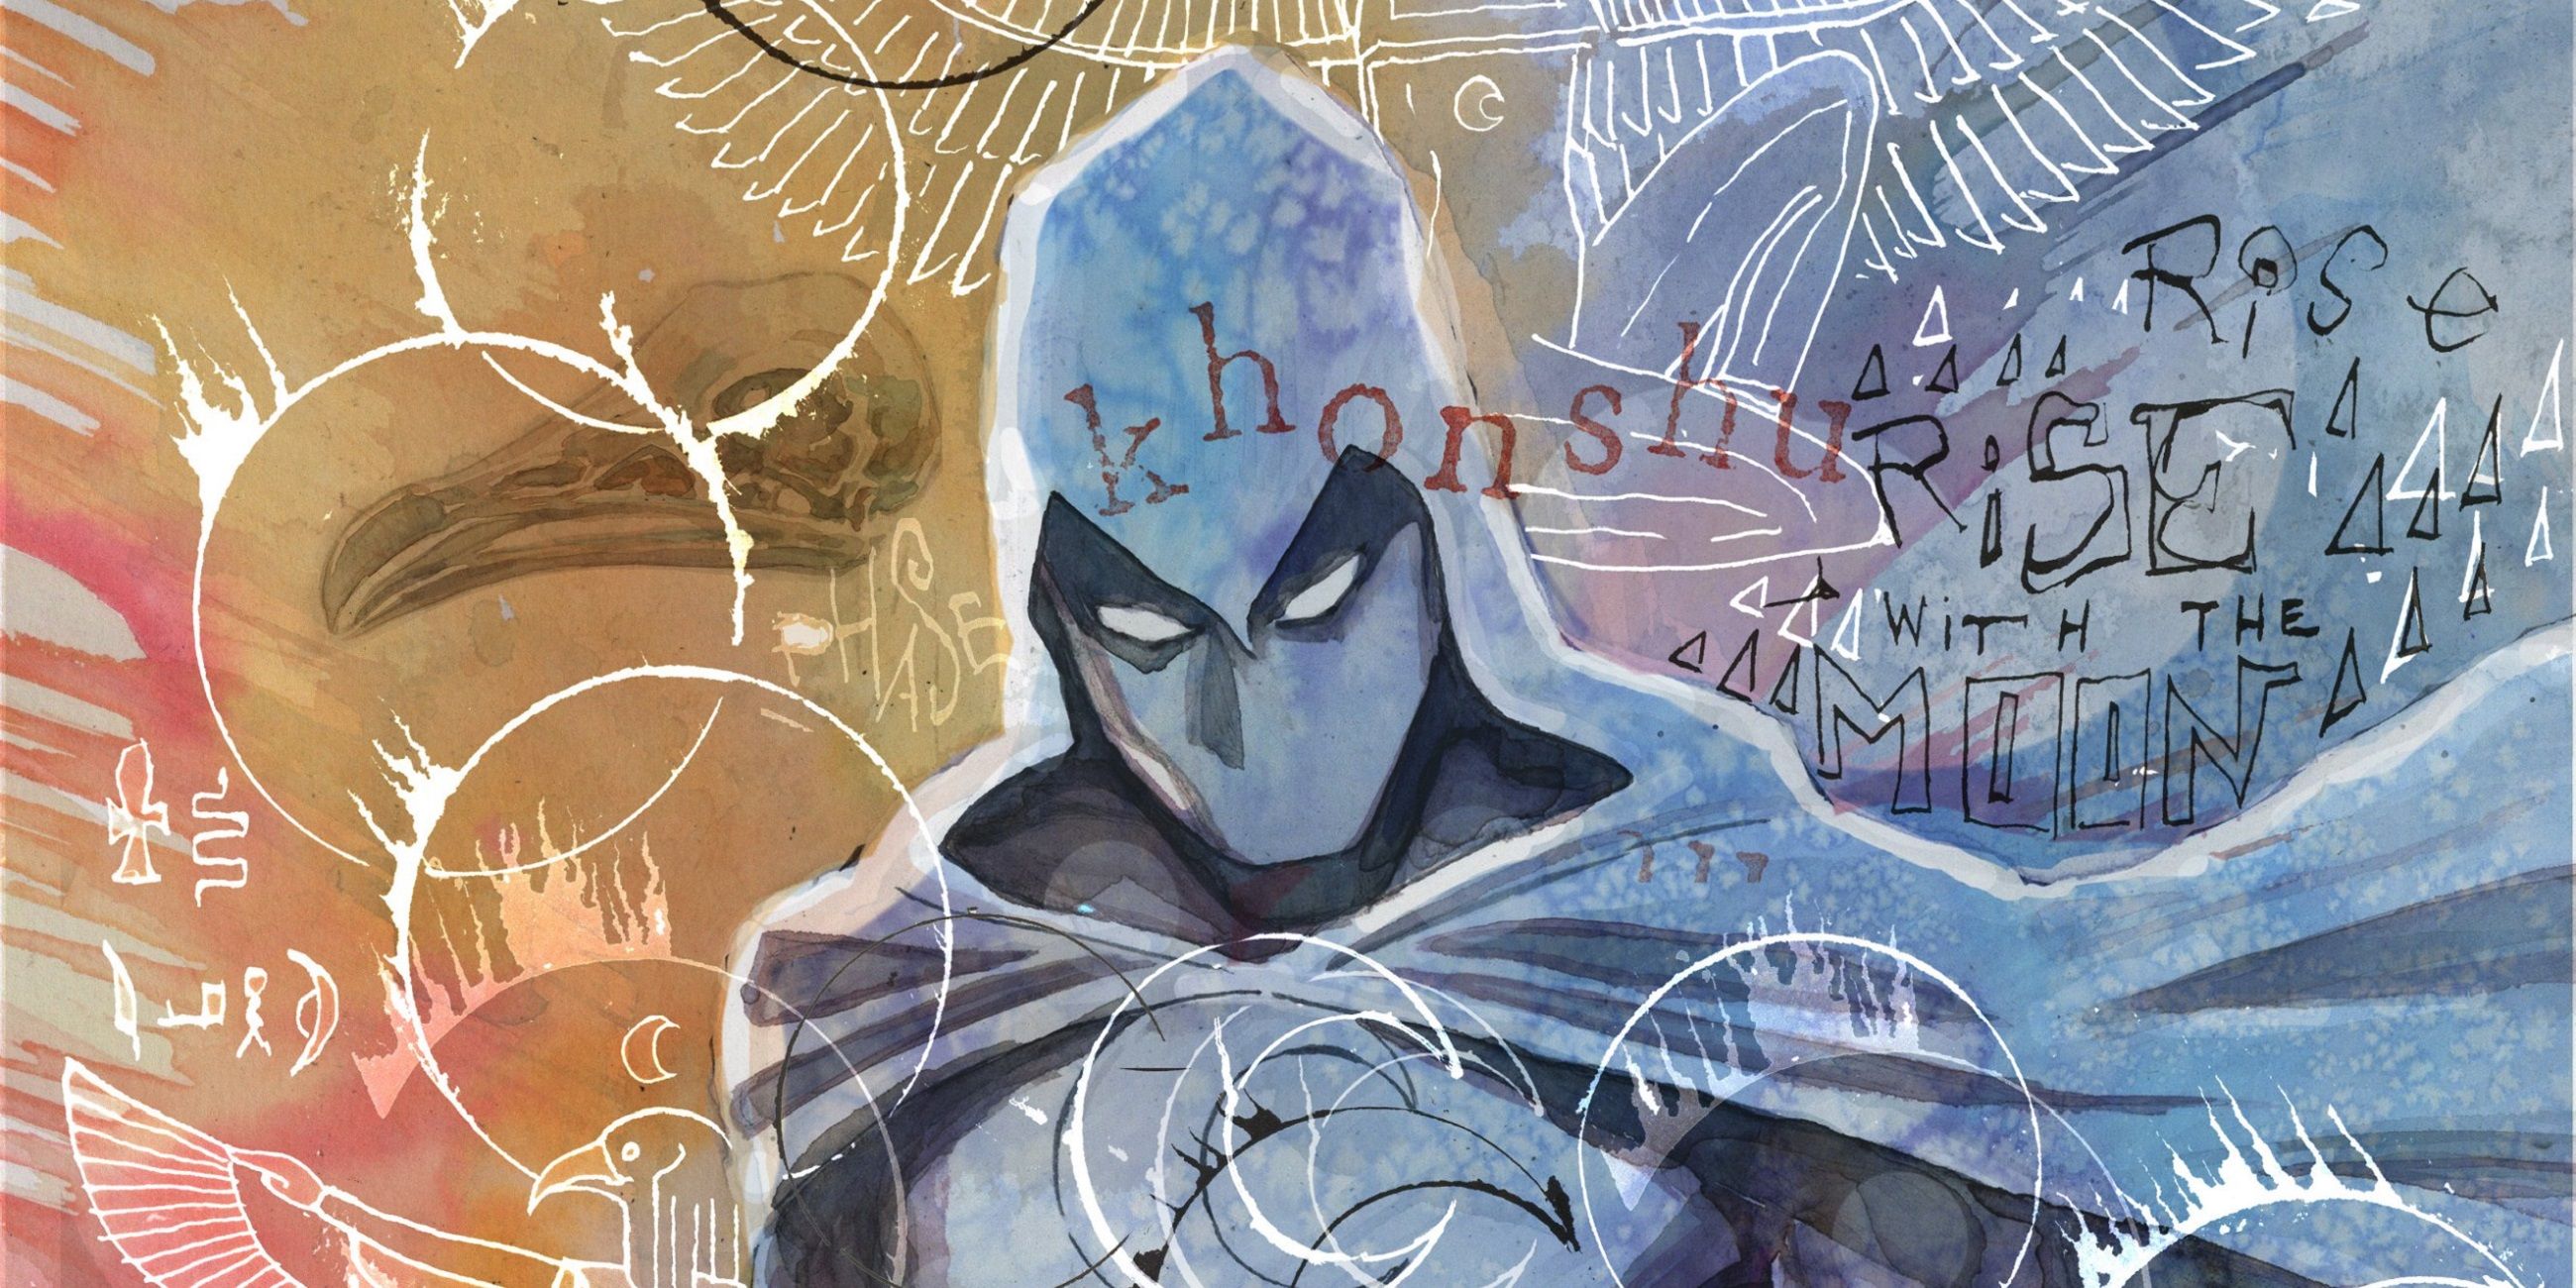 Empire's World-Exclusive Moon Knight Covers Revealed